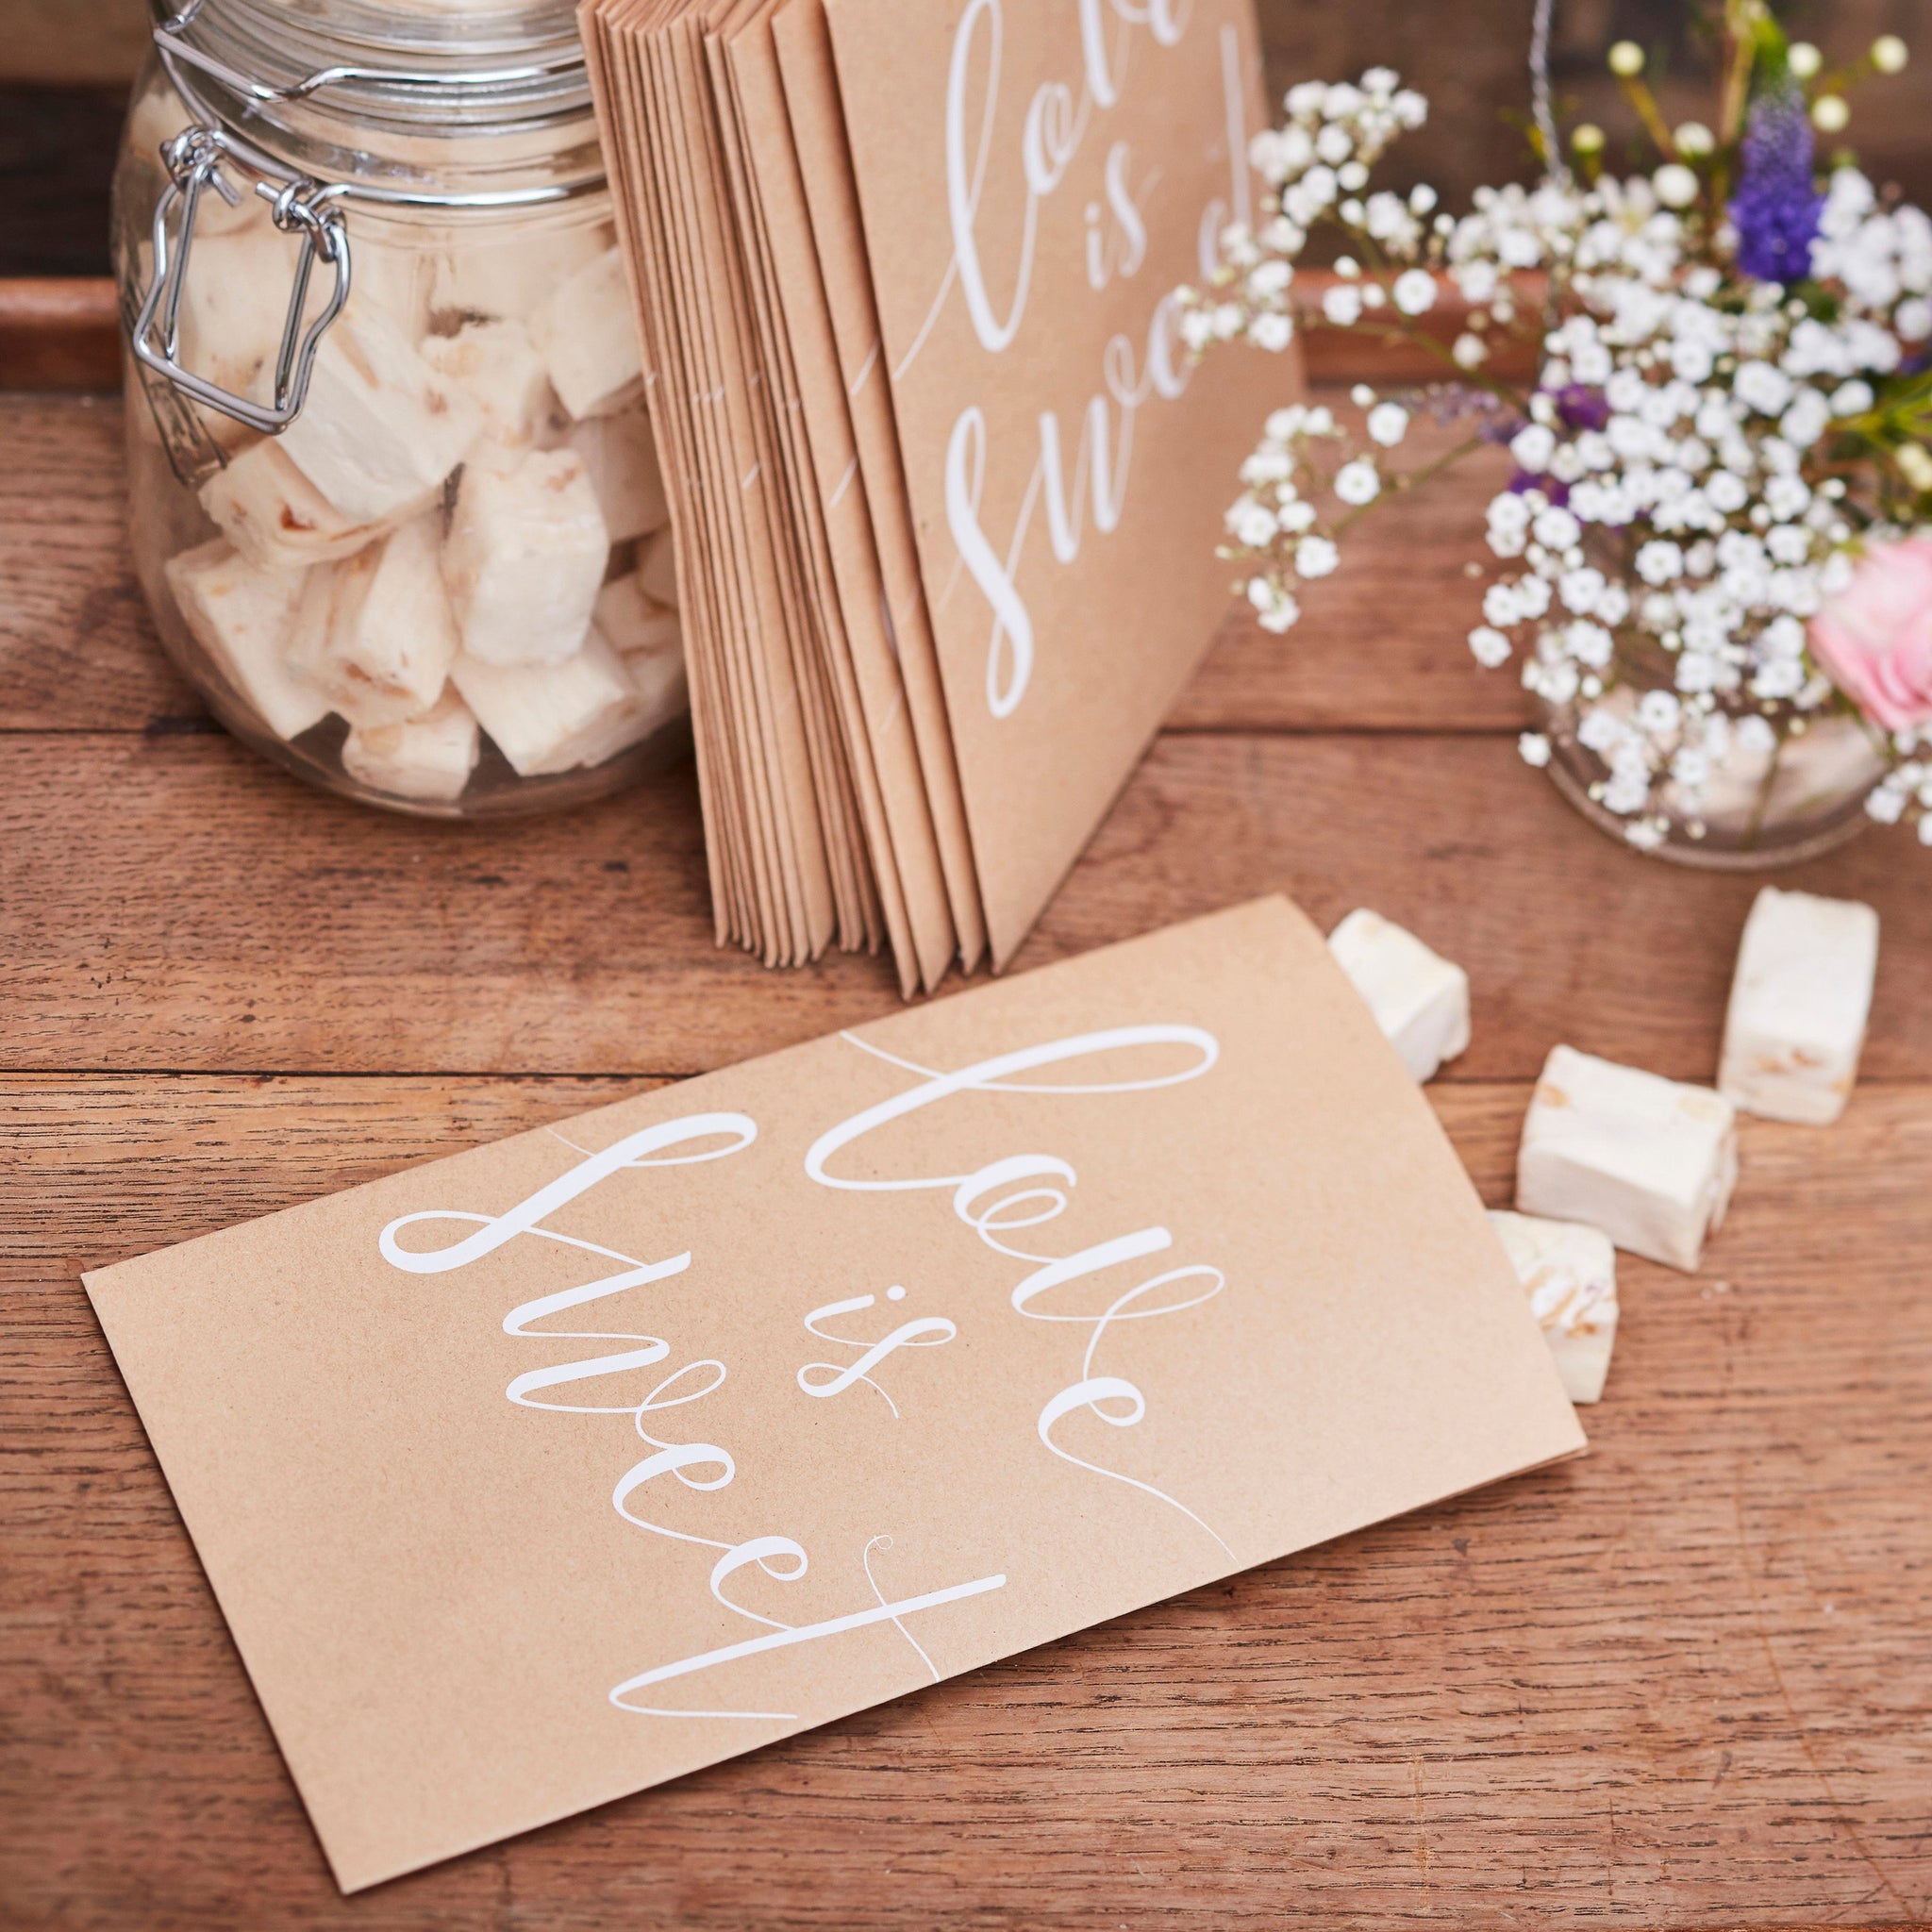 Kraft Treat Bags perfect for wedding favour sweet tables and for your guests to take some goodies away! Pack includes 20 paper party bags with Love is Sweet printed on the front.